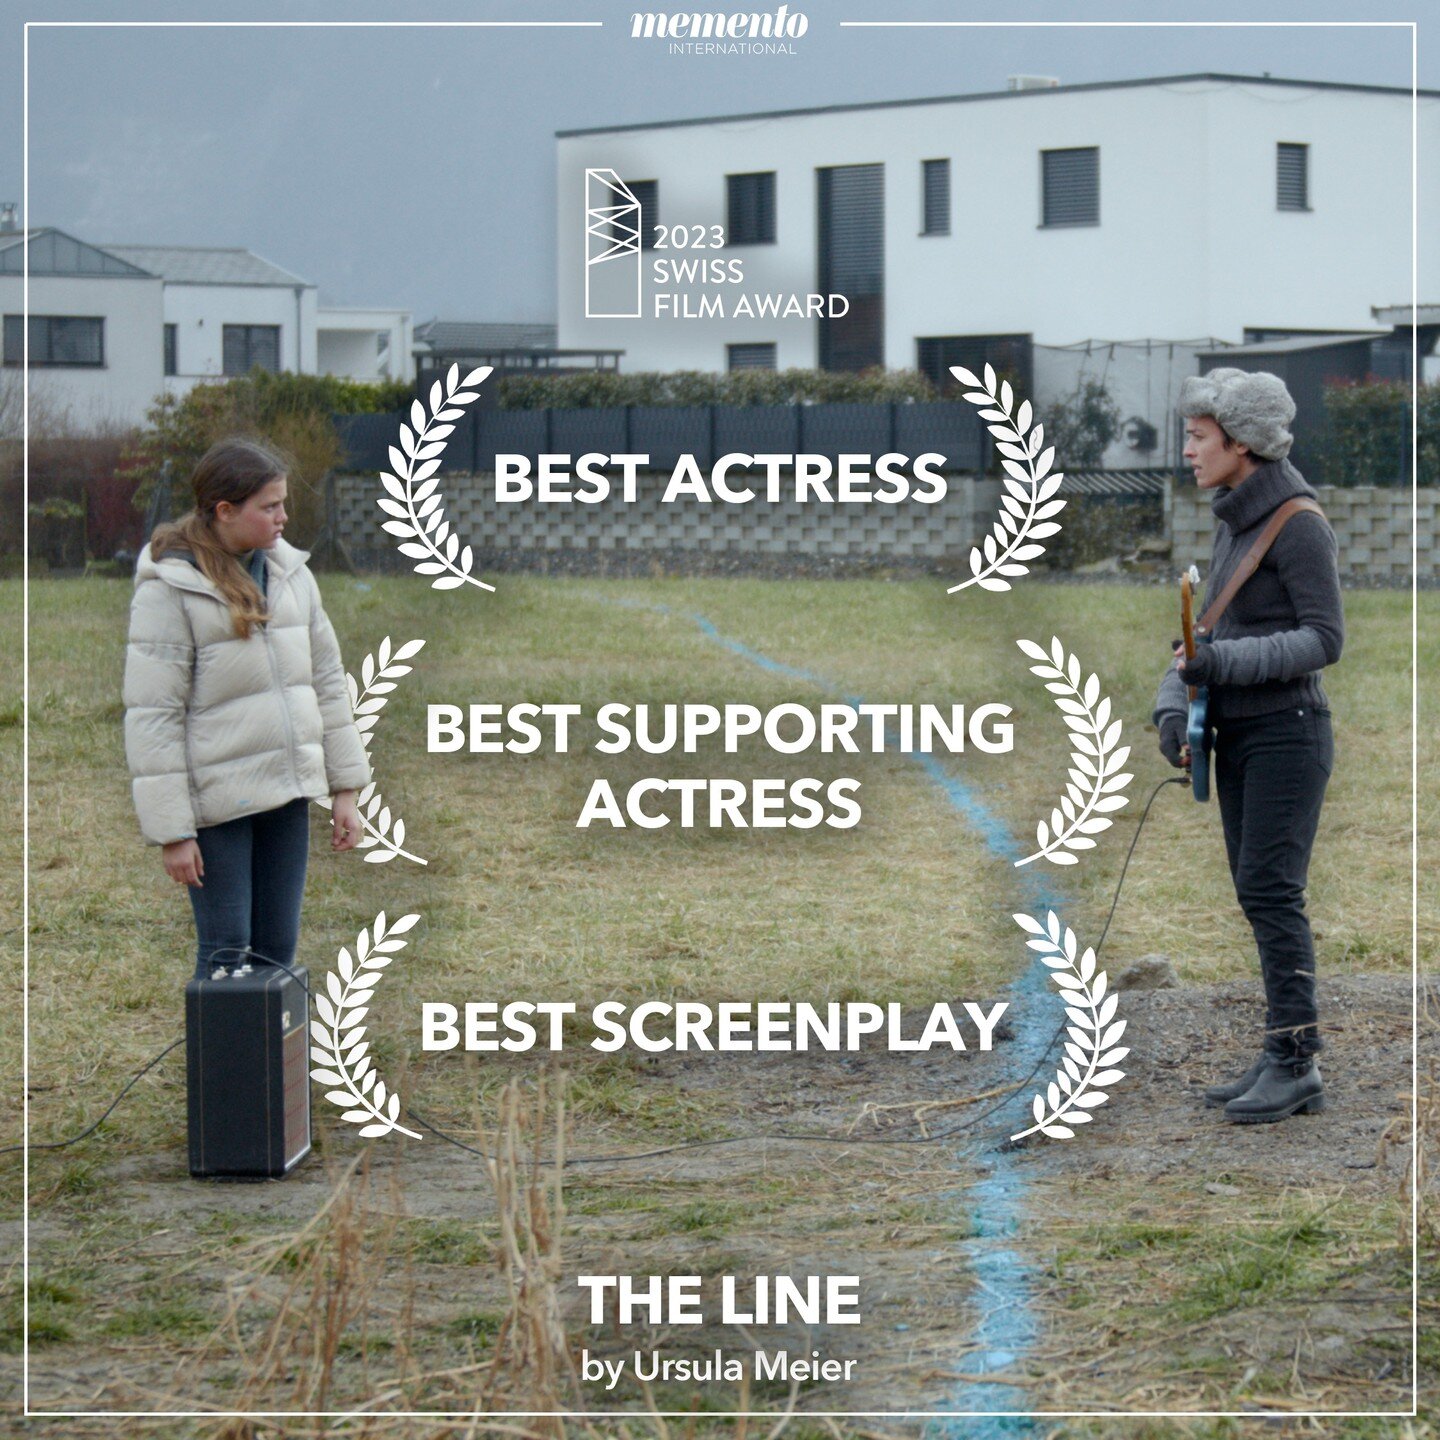 This weekend, Ursula Meier's THE LINE won 3 Quartz at the @prixducinemasuisse !

⭐ Best Actress for St&eacute;phanie Blanchoud
⭐ Best Supporting Actress for Elli Spagnolo
⭐ Best Screenplay for Ursula Meier, St&eacute;phanie Blanchoud and Antoine Jacc